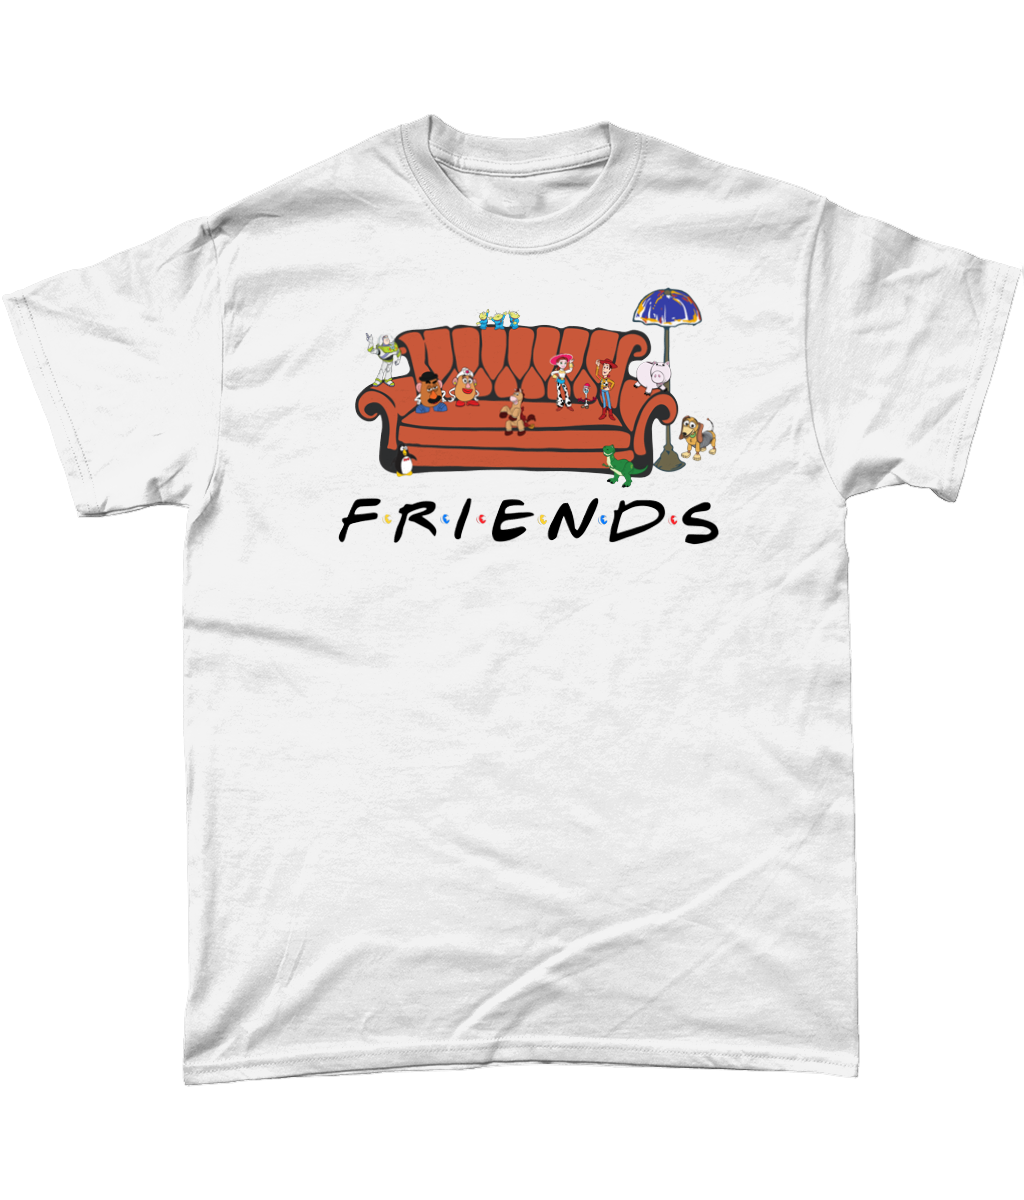 toy story friends. white t-shirt